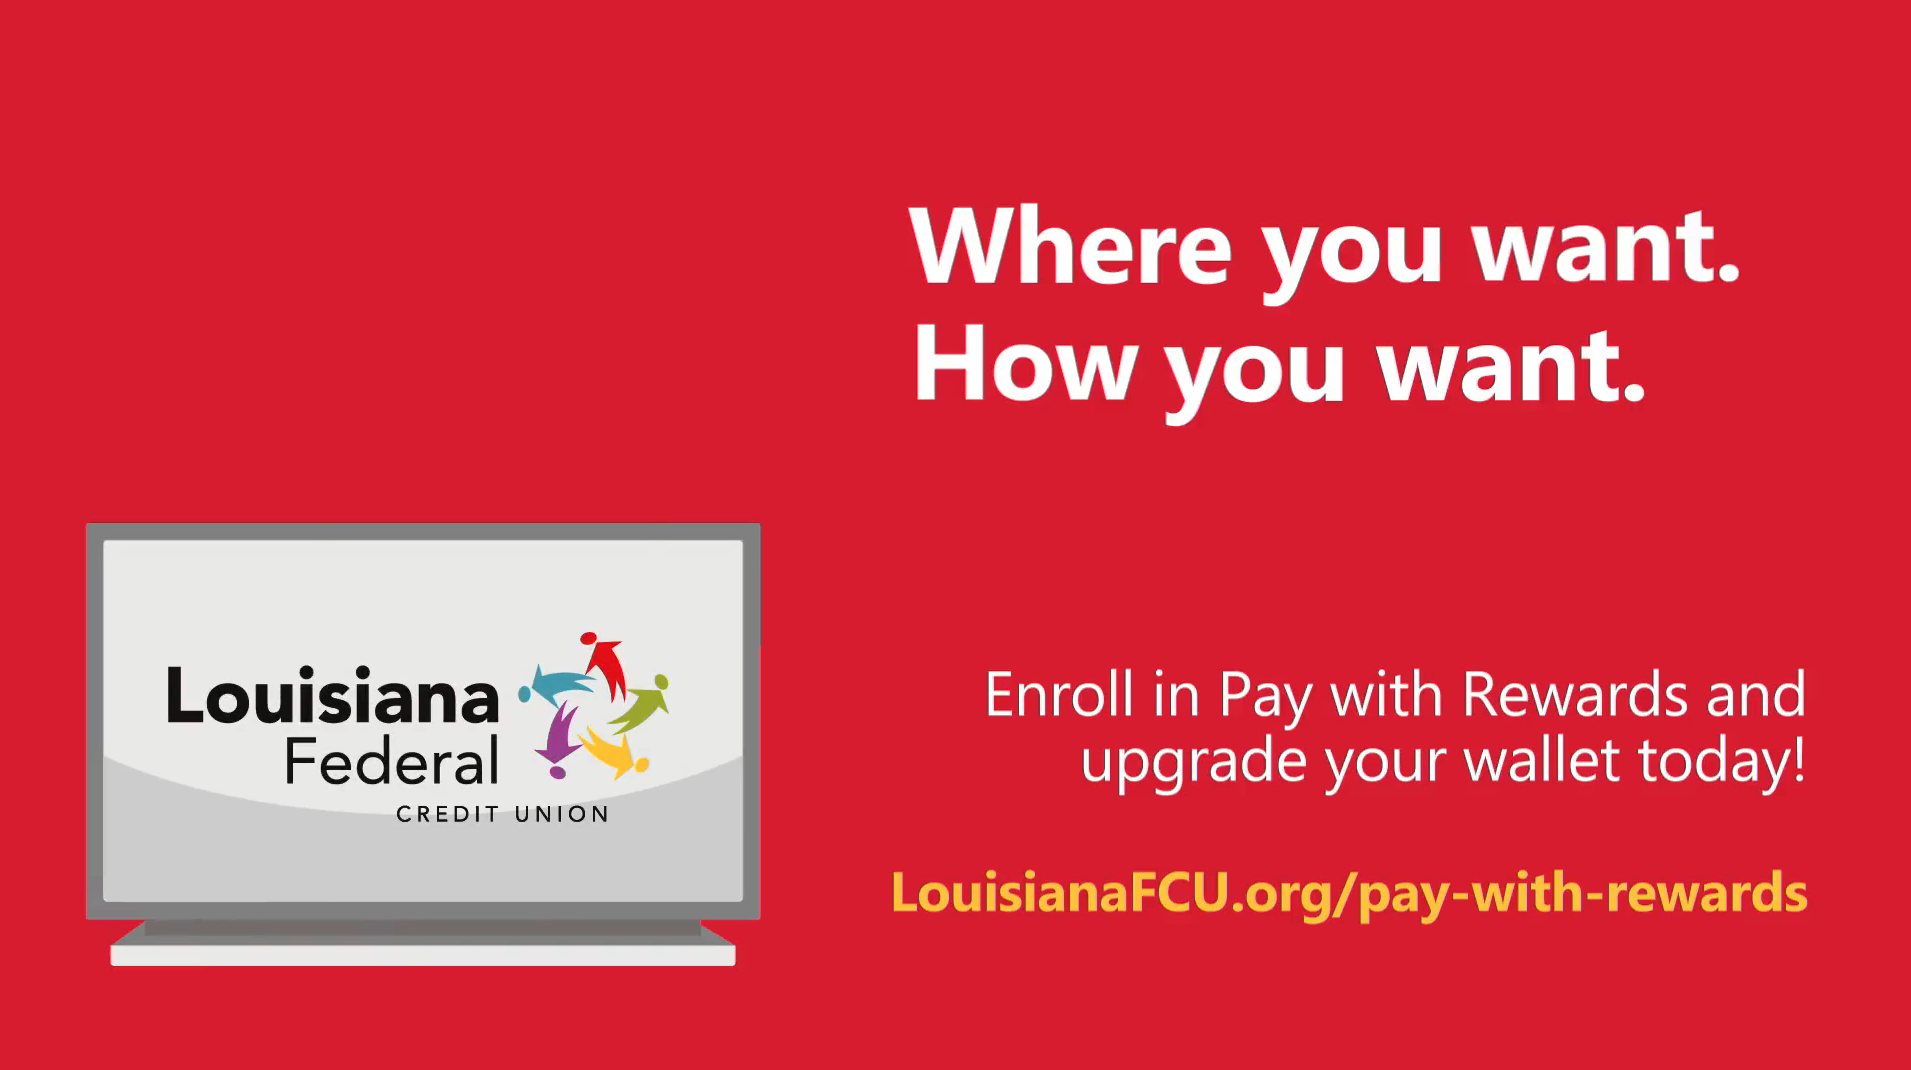 Enroll in Pay with Rewards